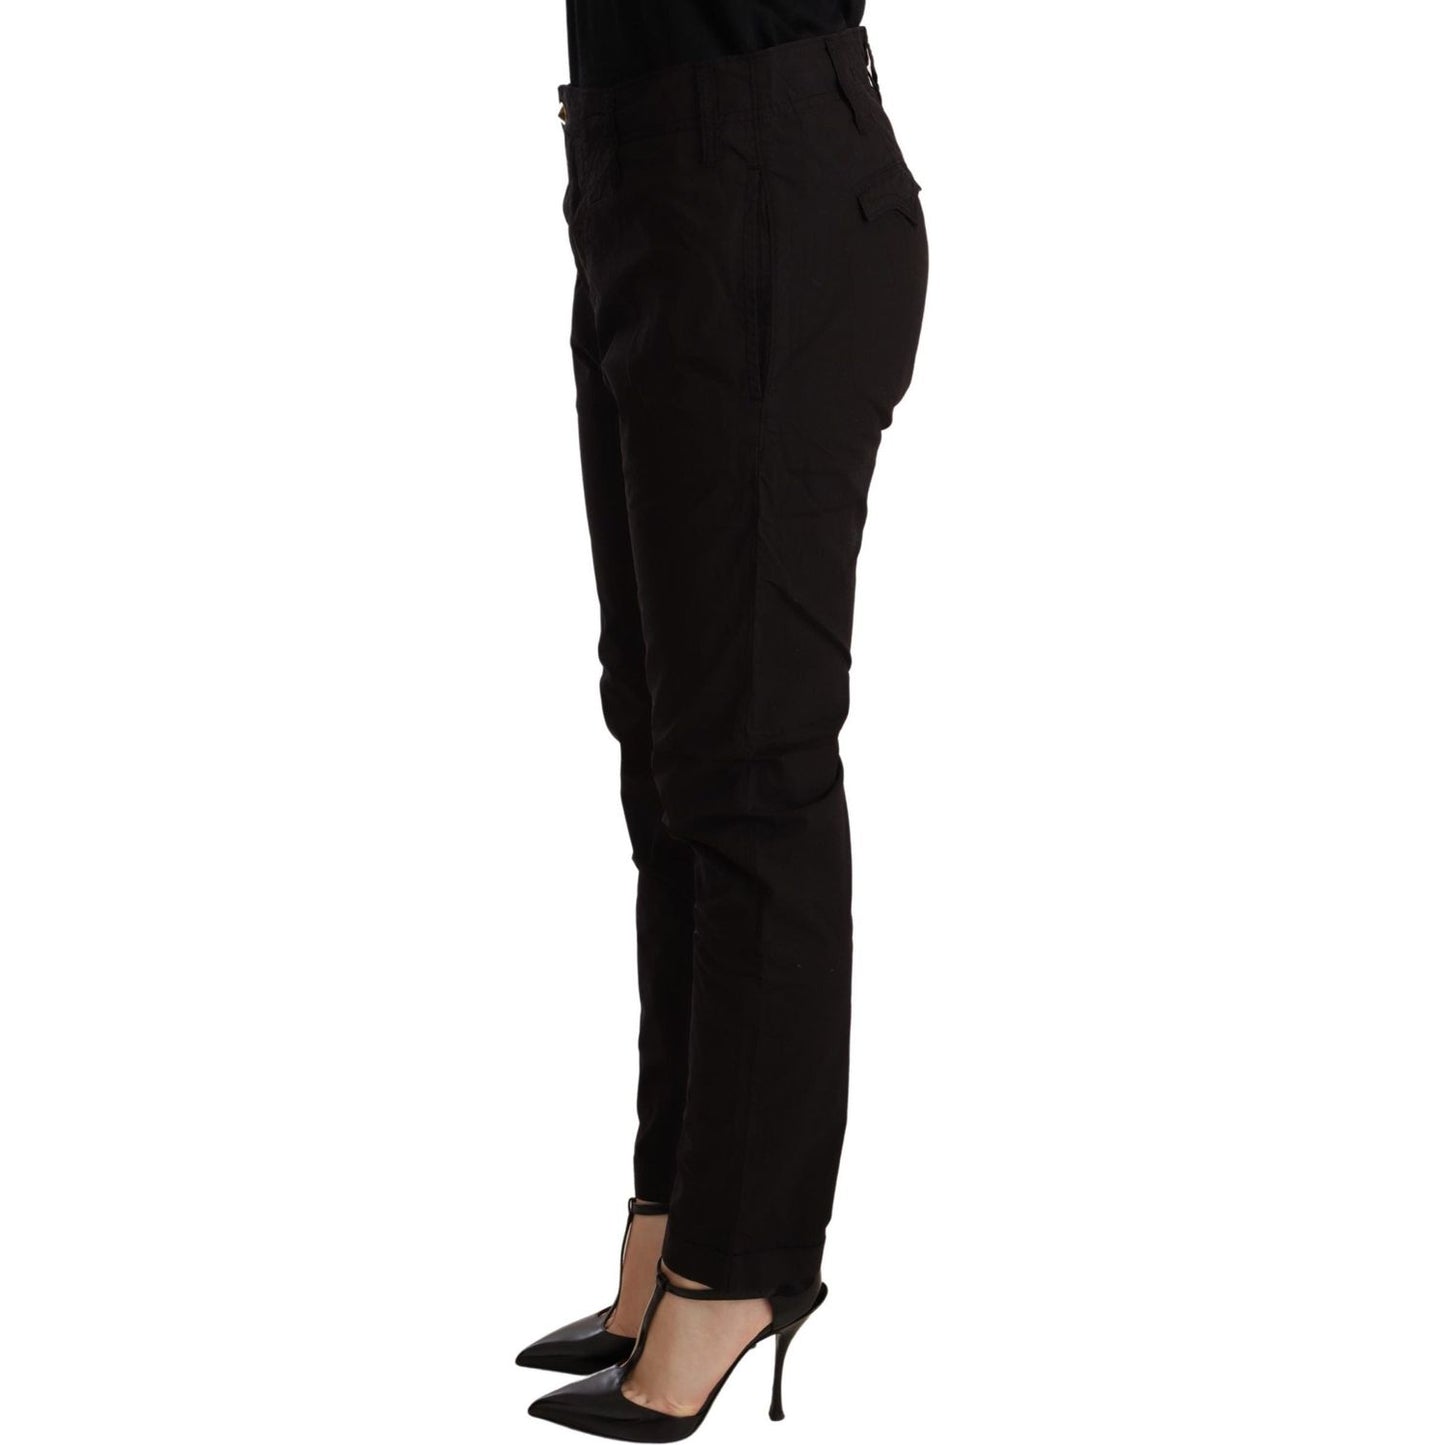 CYCLE Elegant Black Baggy Cotton Pants WOMAN TROUSERS black-mid-waist-baggy-fit-skinny-trouser IMG_5113-scaled-f3ad2045-381.jpg